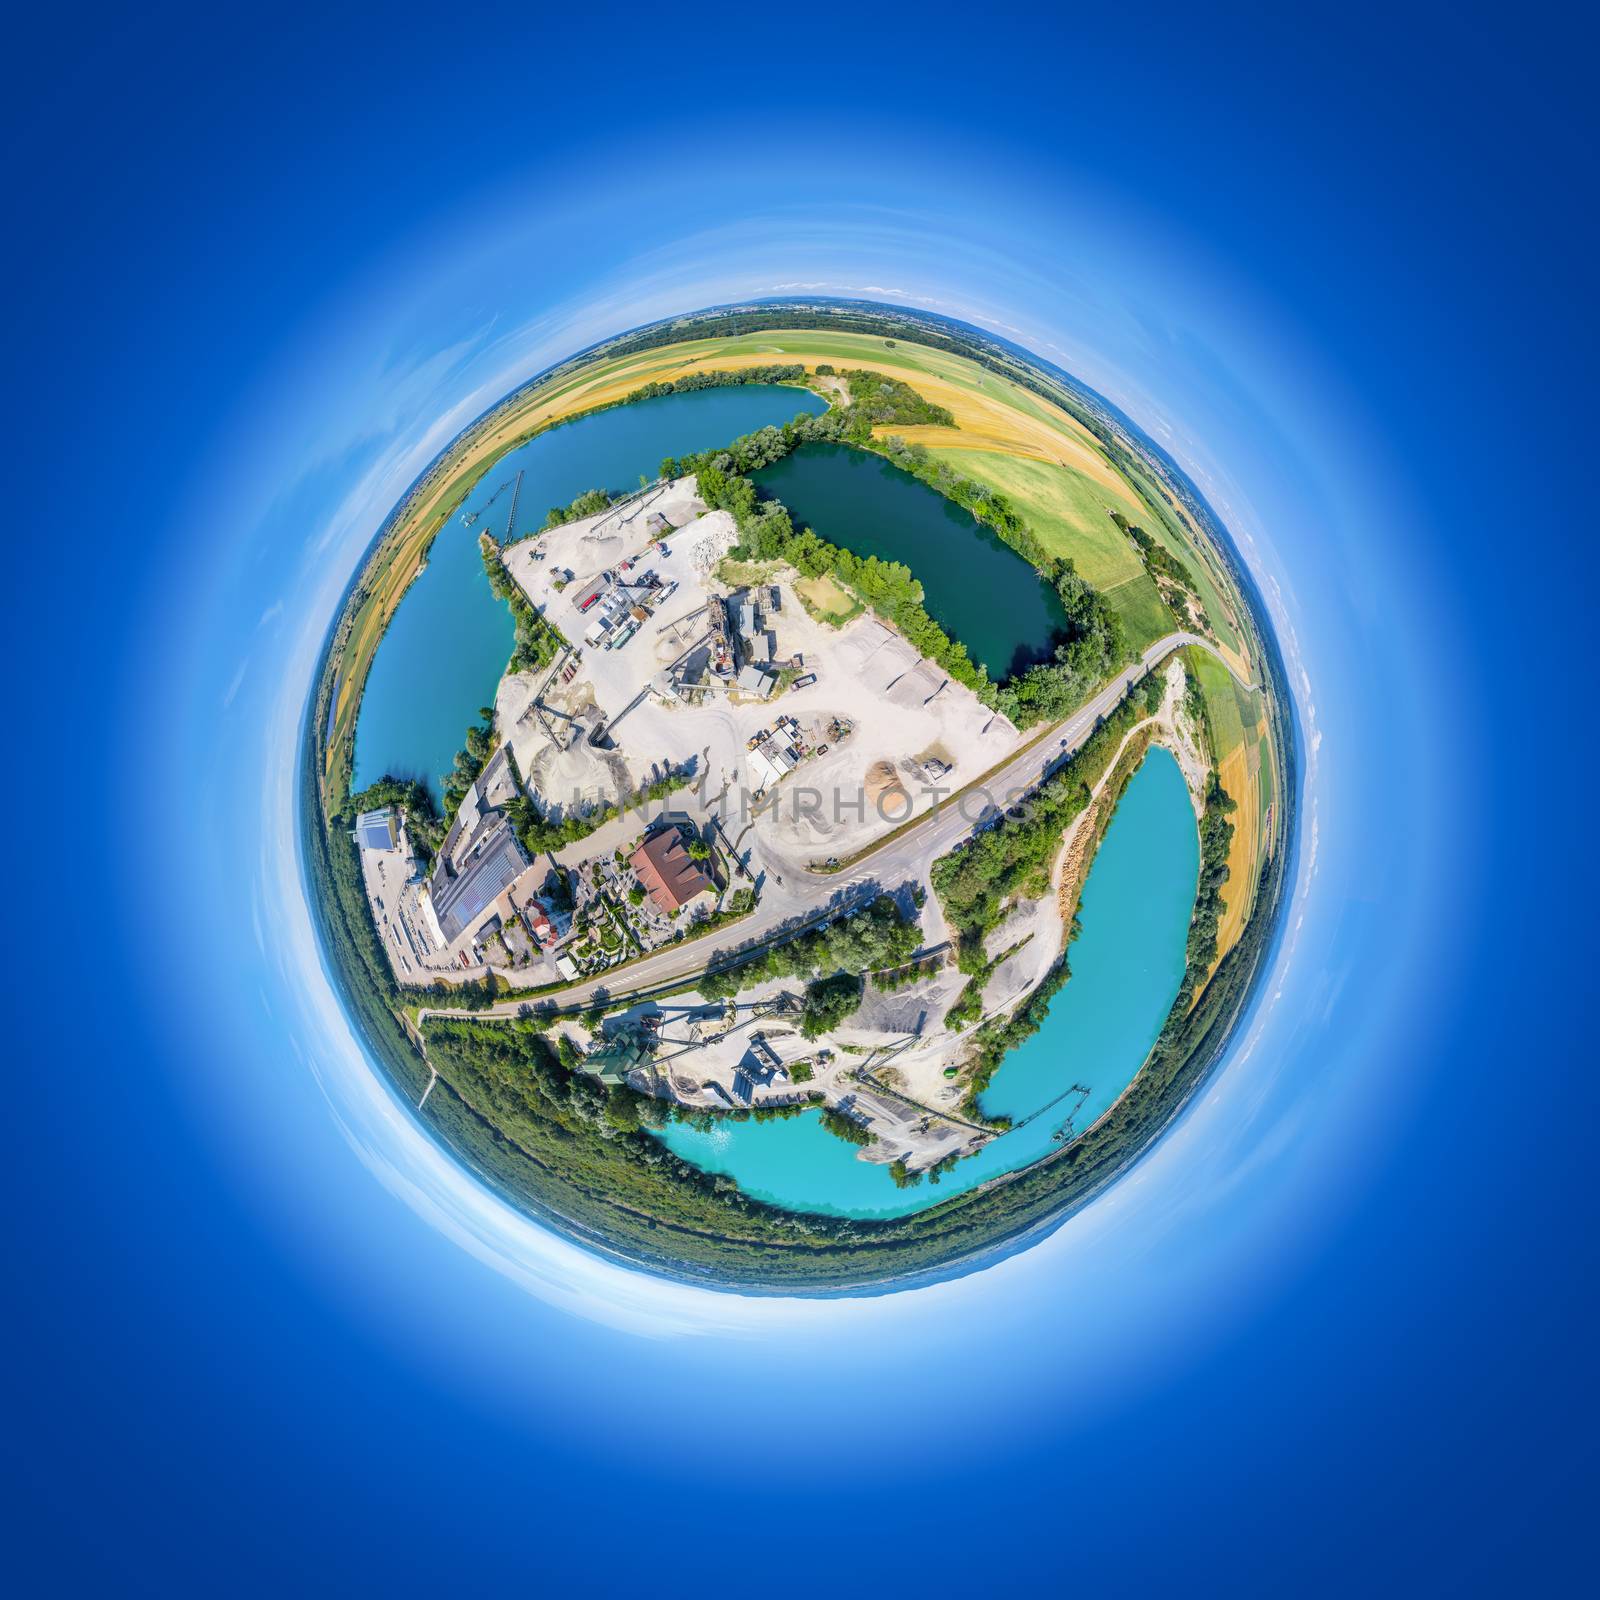 A little planet of lakes at the Rhine valley south Germany